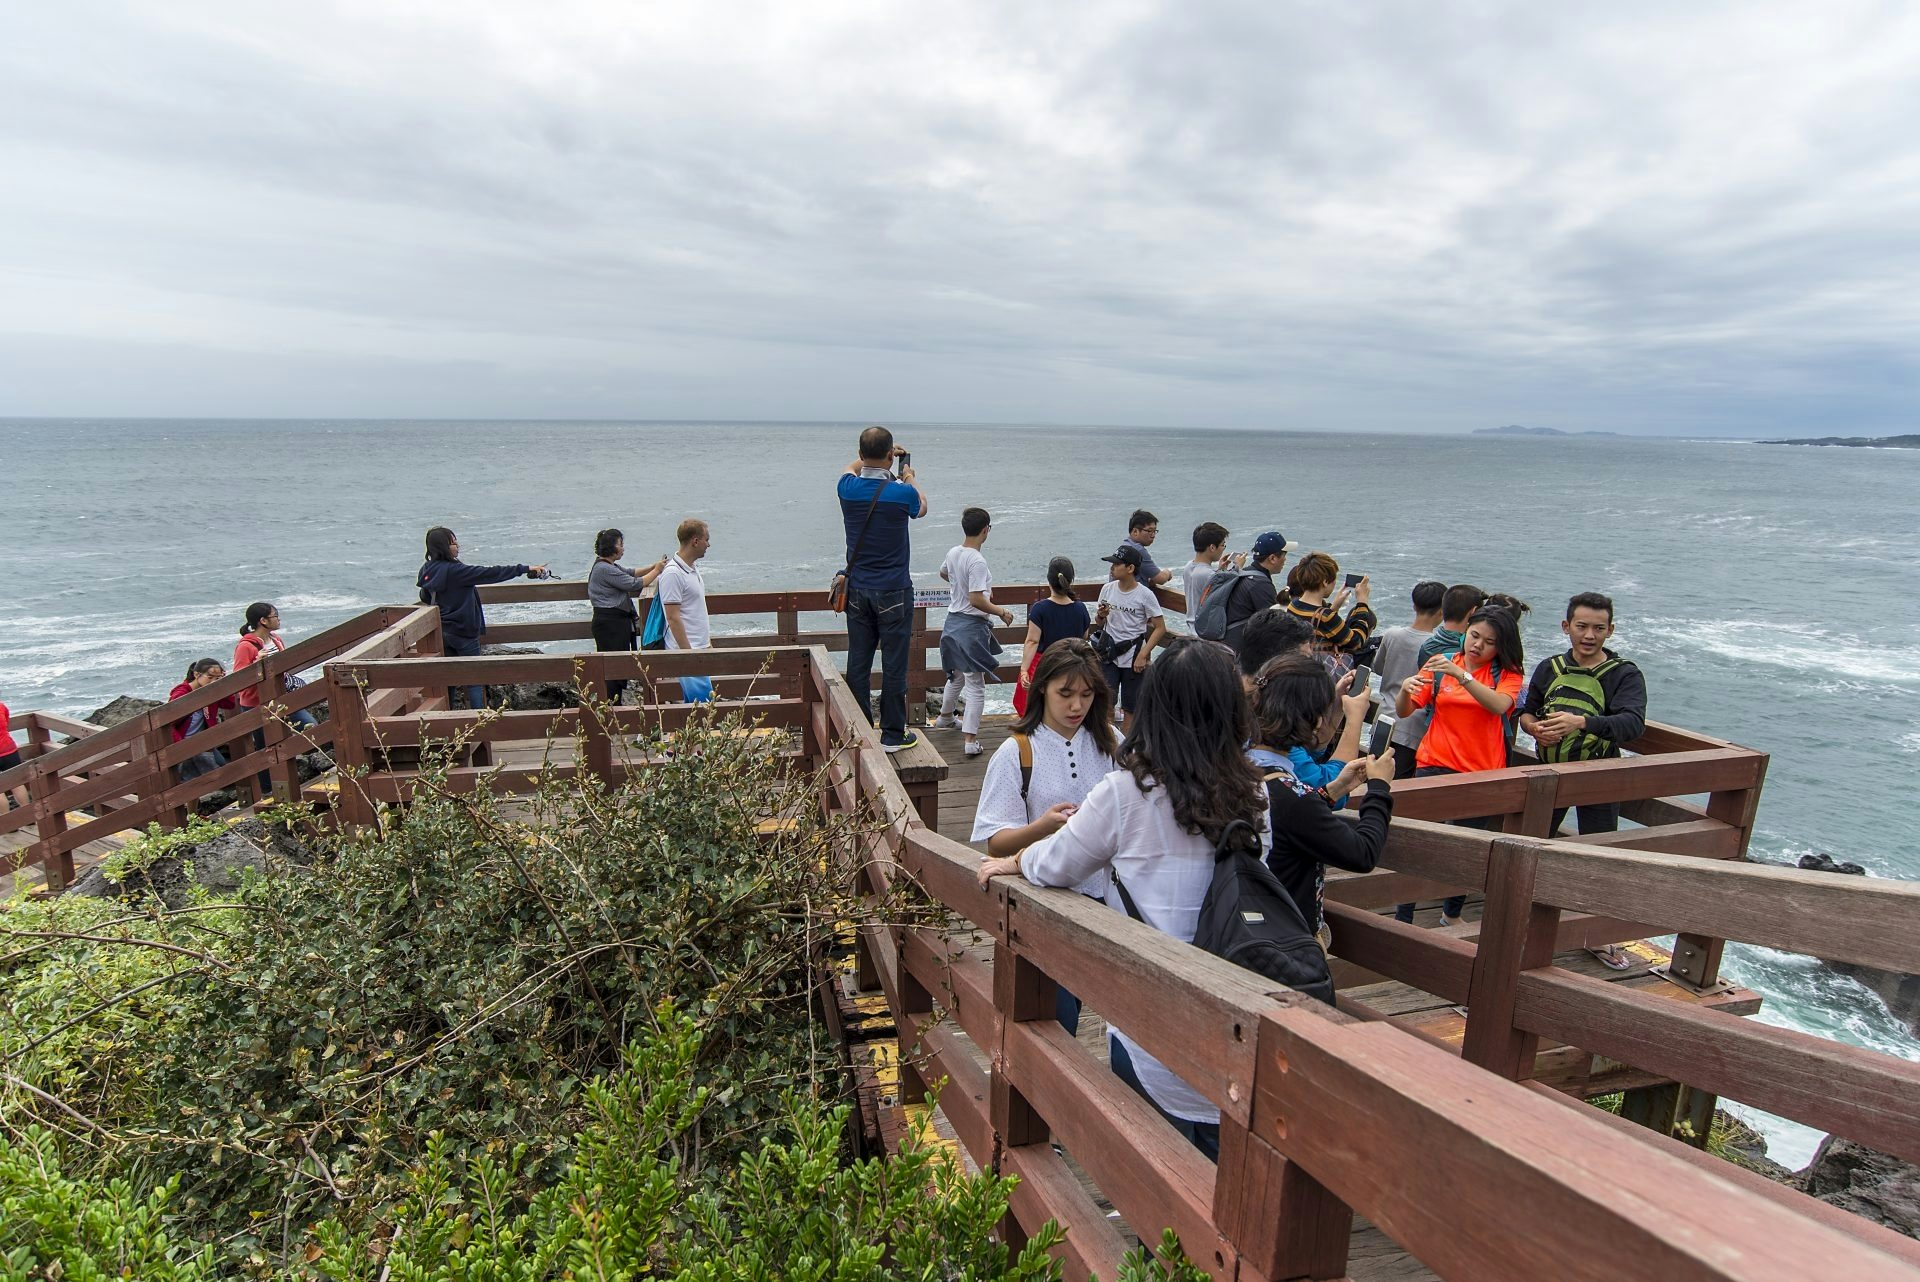 Jeju Island, one of the most popular destinations for Chinese tourists in South Korea, stands to lose a majority of its visitors under China's new travel ban. (Savvapanf Photo/Shutterstock)